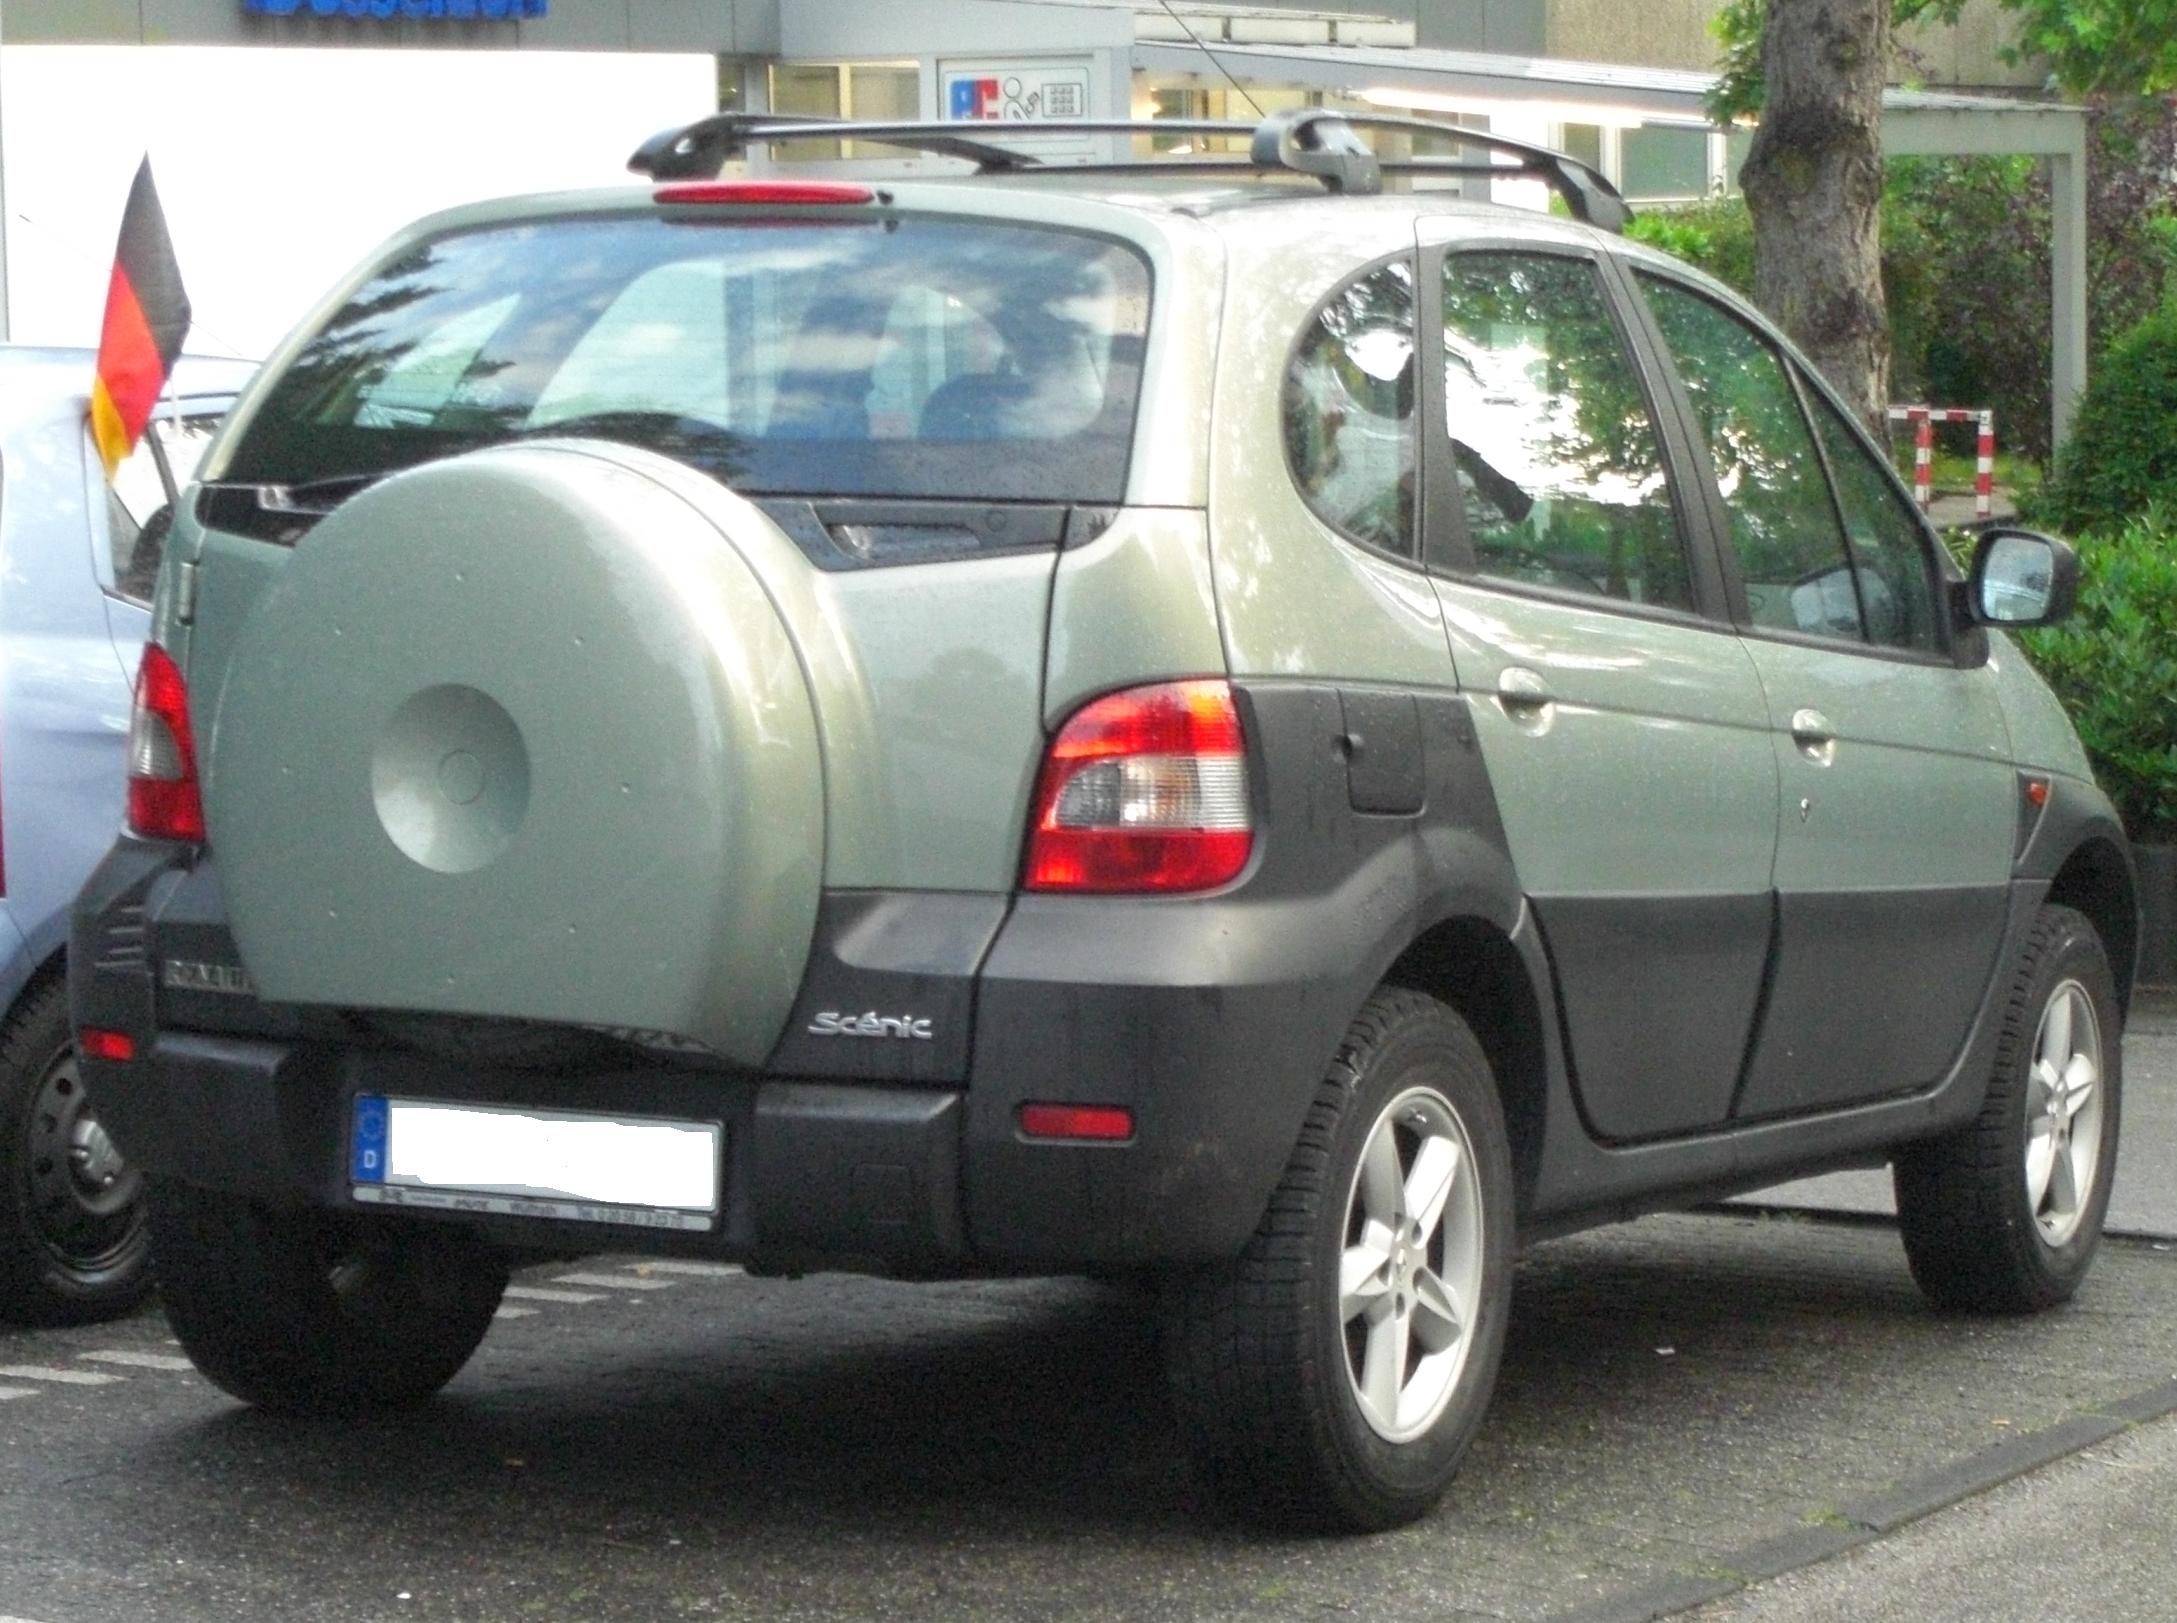 File:Renault Scénic RX4 rear.jpg - Wikimedia Commons